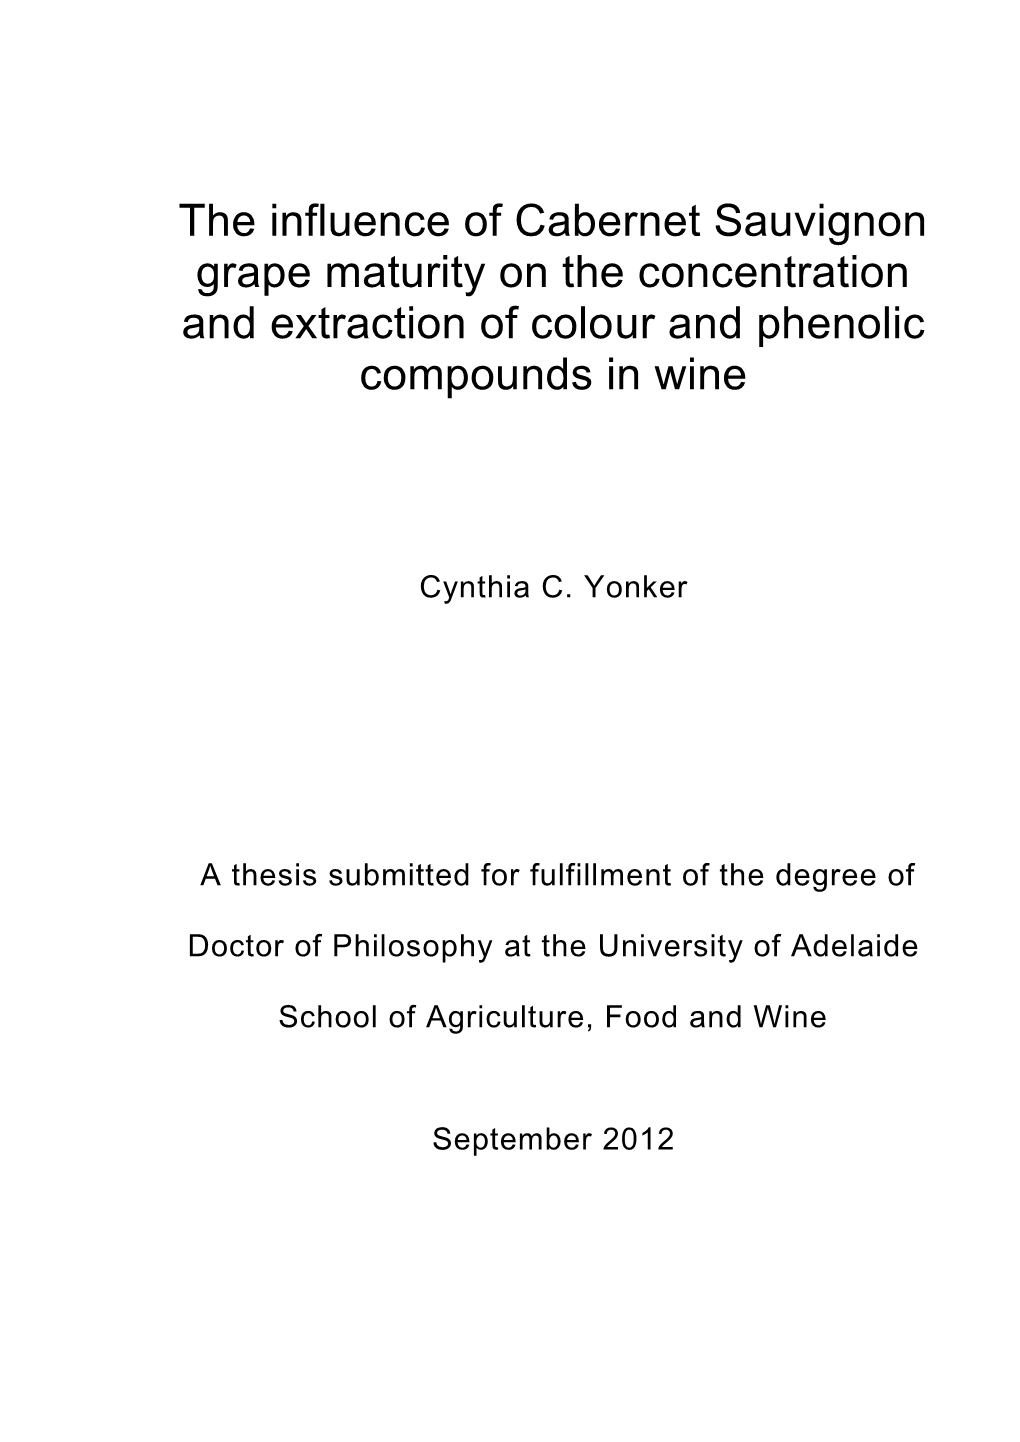 The Influence of Cabernet Sauvignon Grape Maturity on the Concentration and Extraction of Colour and Phenolic Compounds in Wine